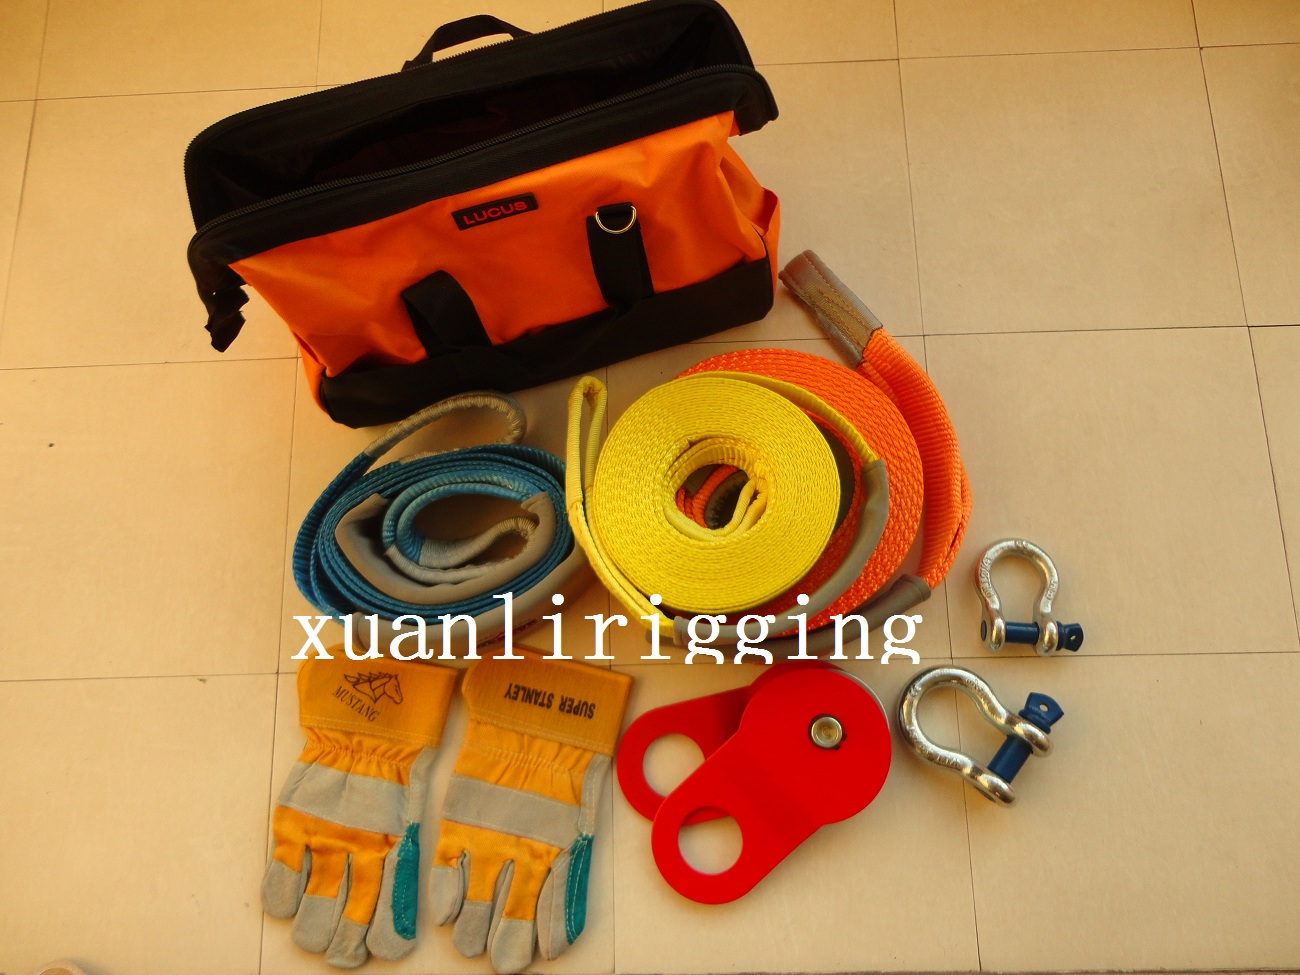 offorad recovery gear kit